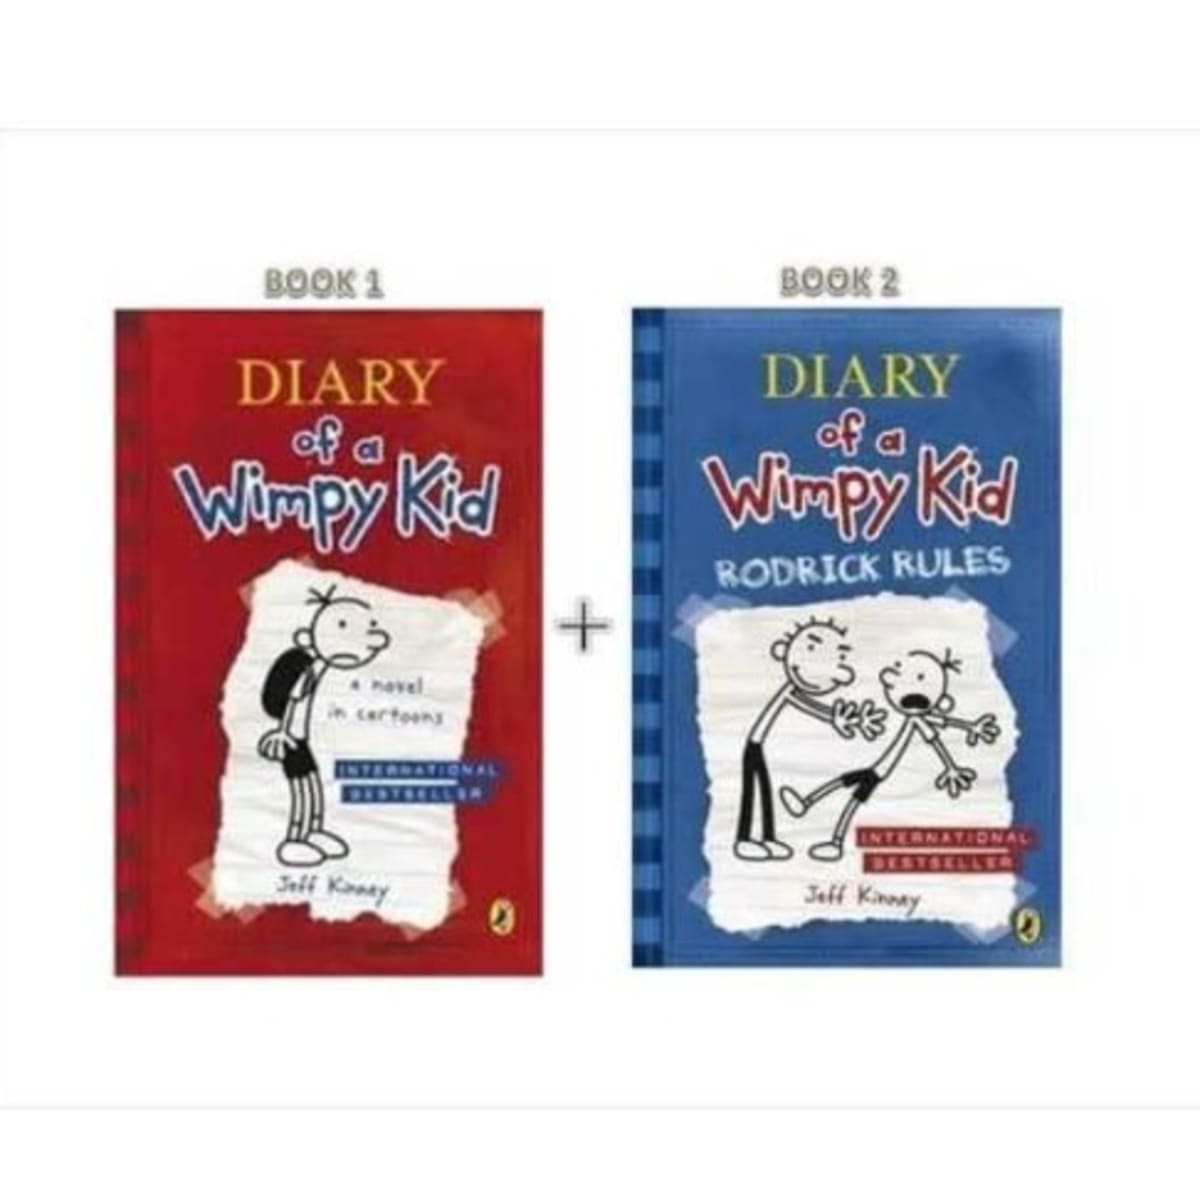 Diary of a Wimpy Kid - Book 1 & 2